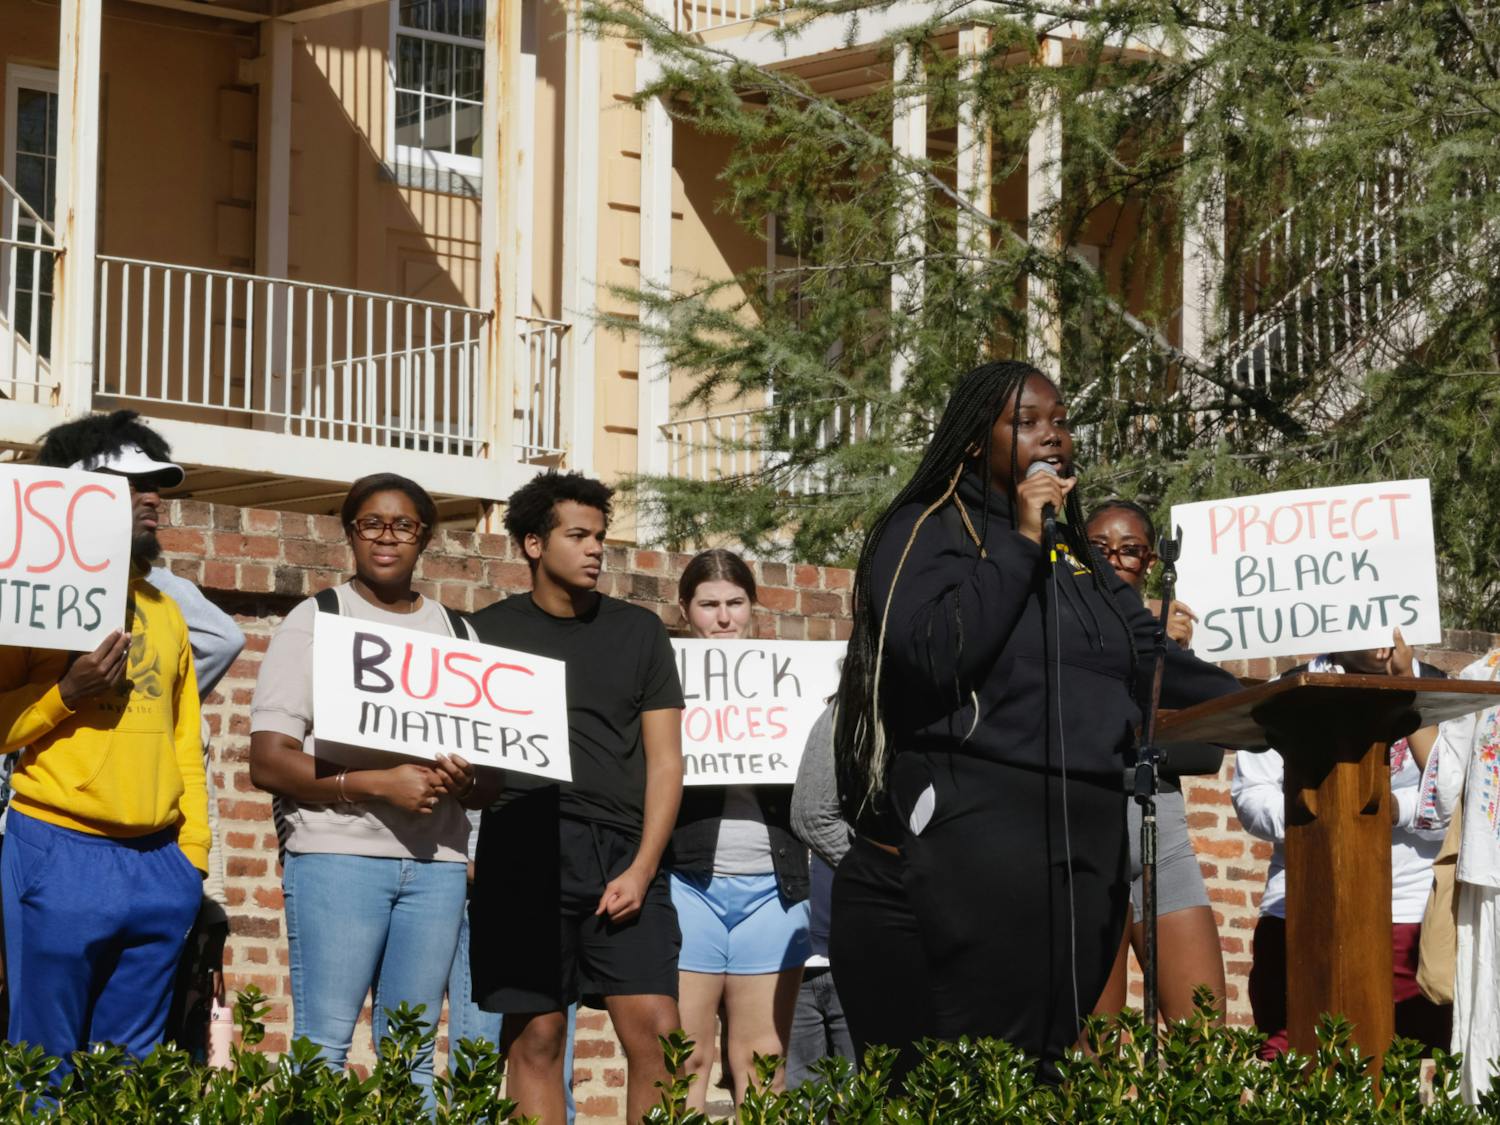 A protestor speaks out on institutional racism against Black students at the University of South Carolina on Jan. 20, 2023. The protest was organized by Courtney McClain, a fourth-year broadcast student and the president of the SC NAACP Y&amp;C Division at the University of South Carolina.